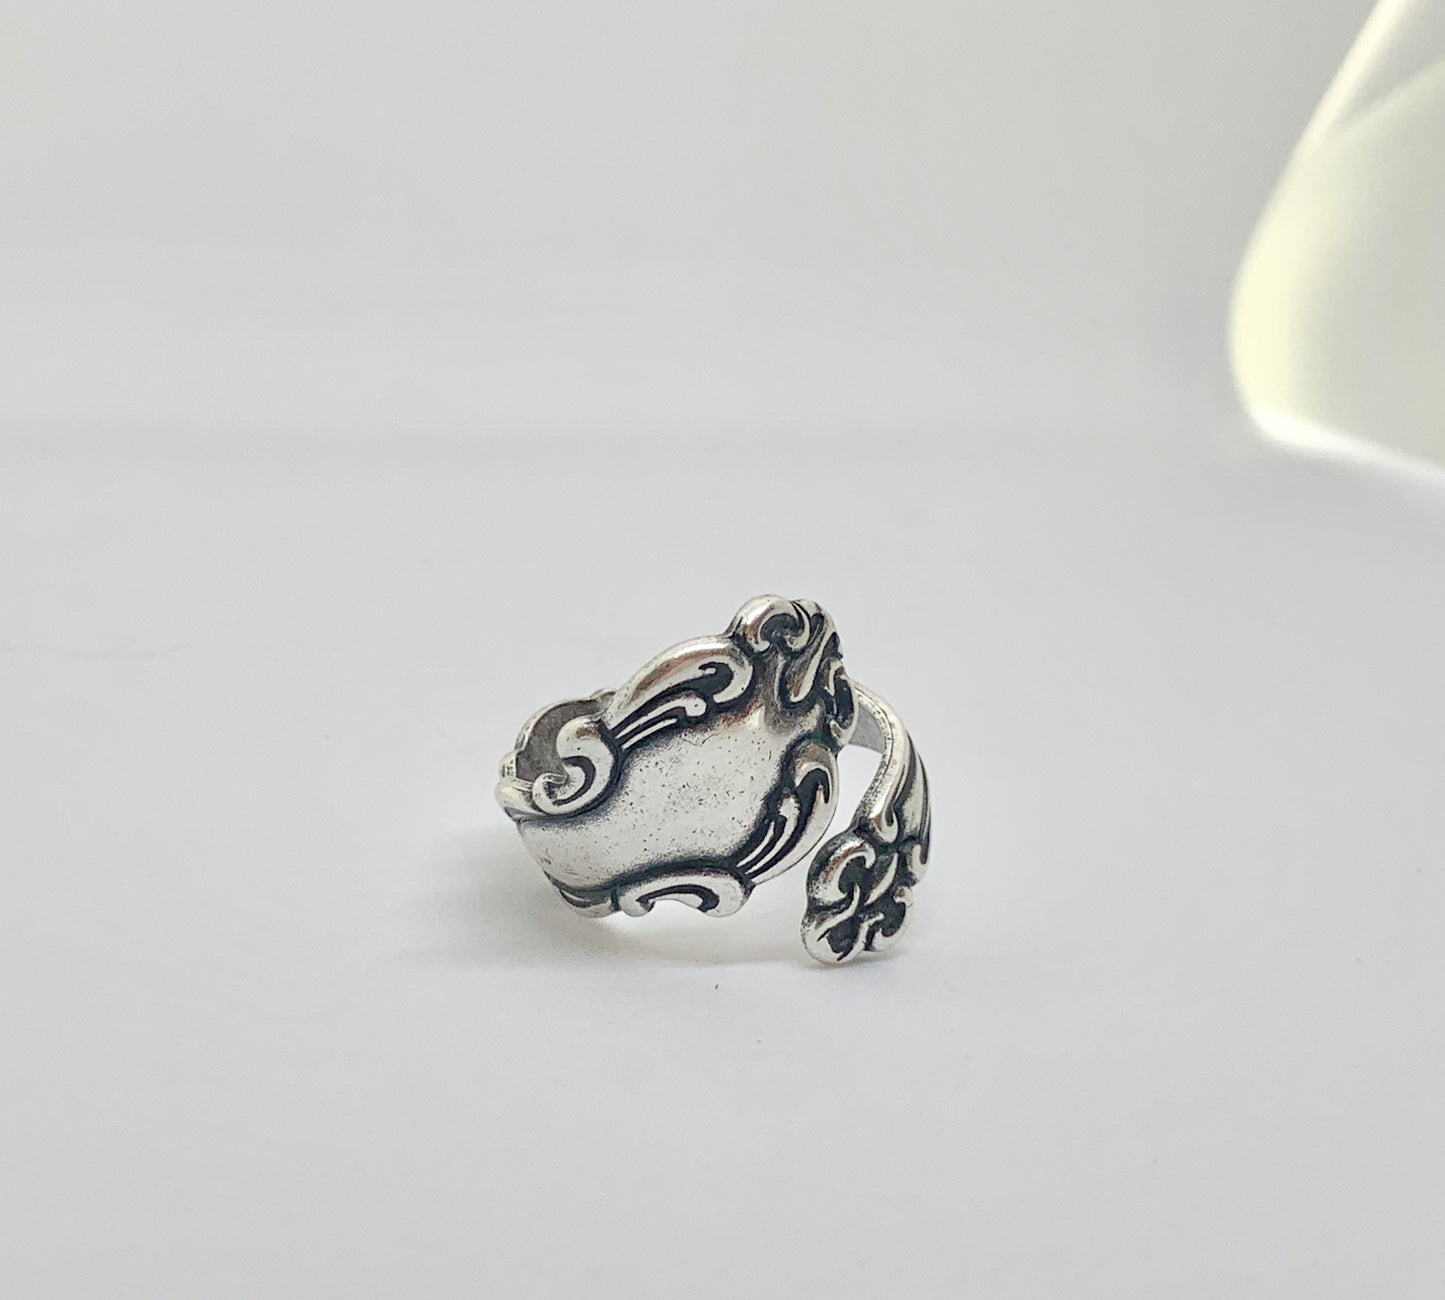 Spoon Ring. Sterling silver ring, silver jewelry, bohemian fashion accessories. - Andria Bieber Designs 